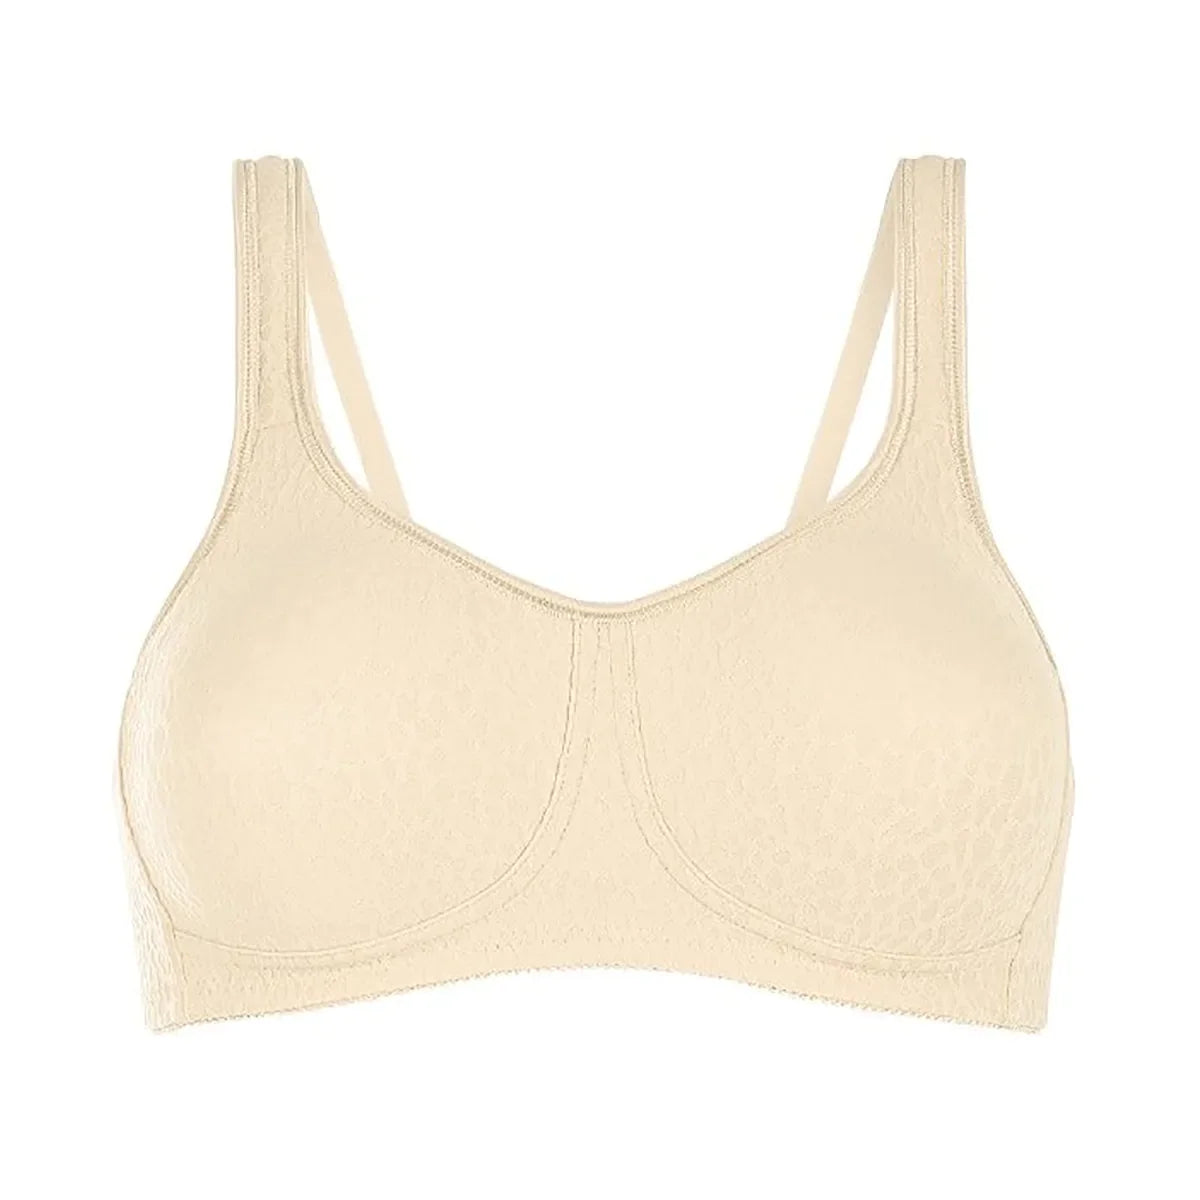 34d - Buy 34d at Best Price in Malaysia